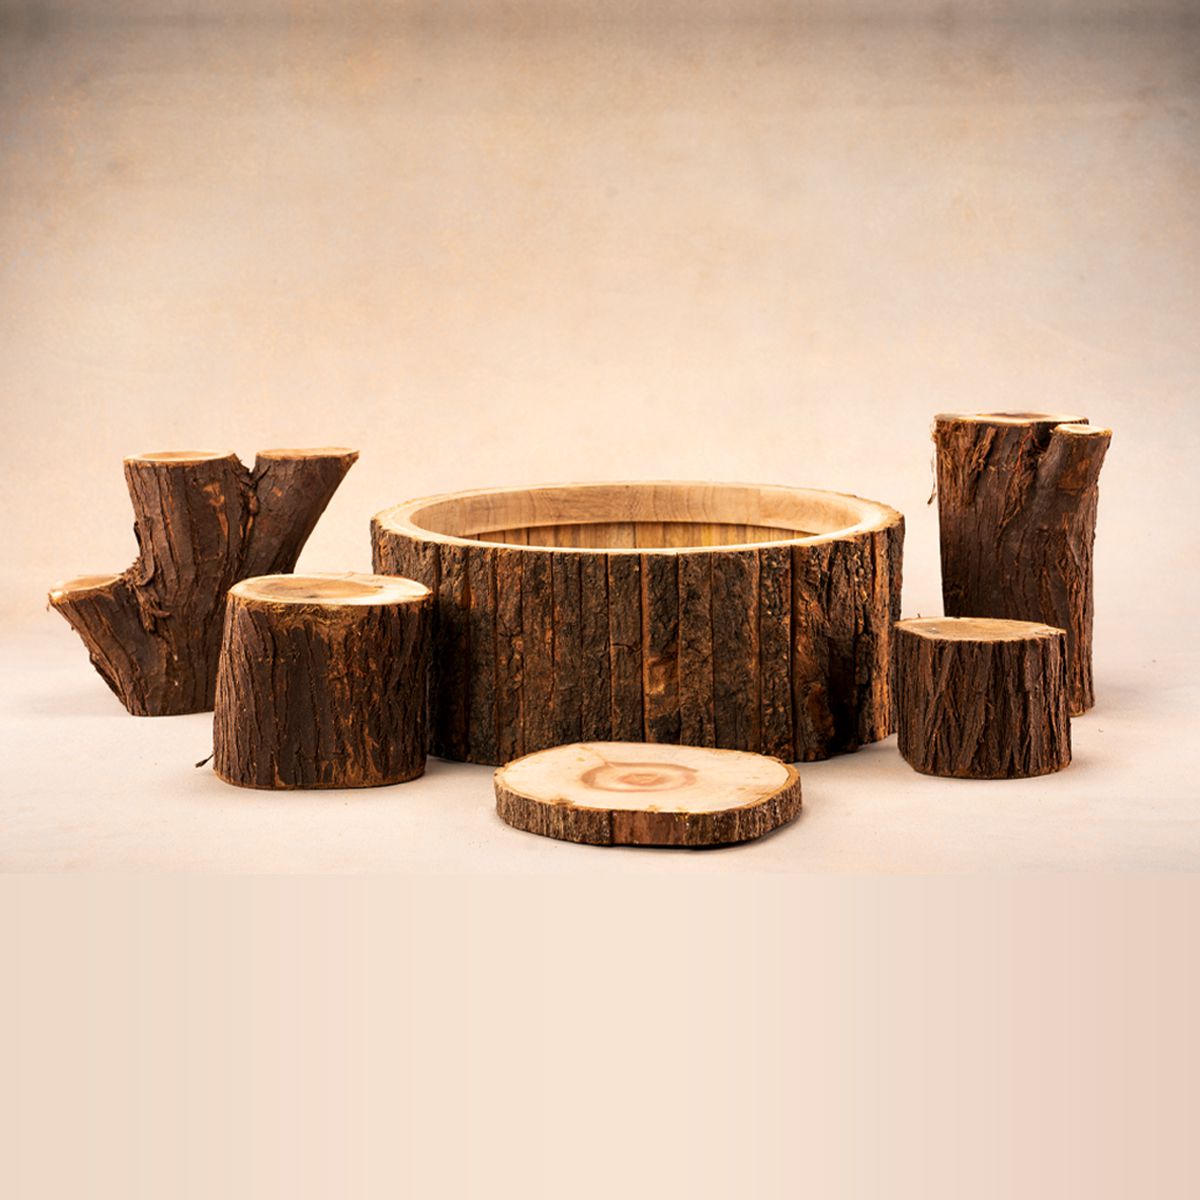 Wooden bark bowl with logs